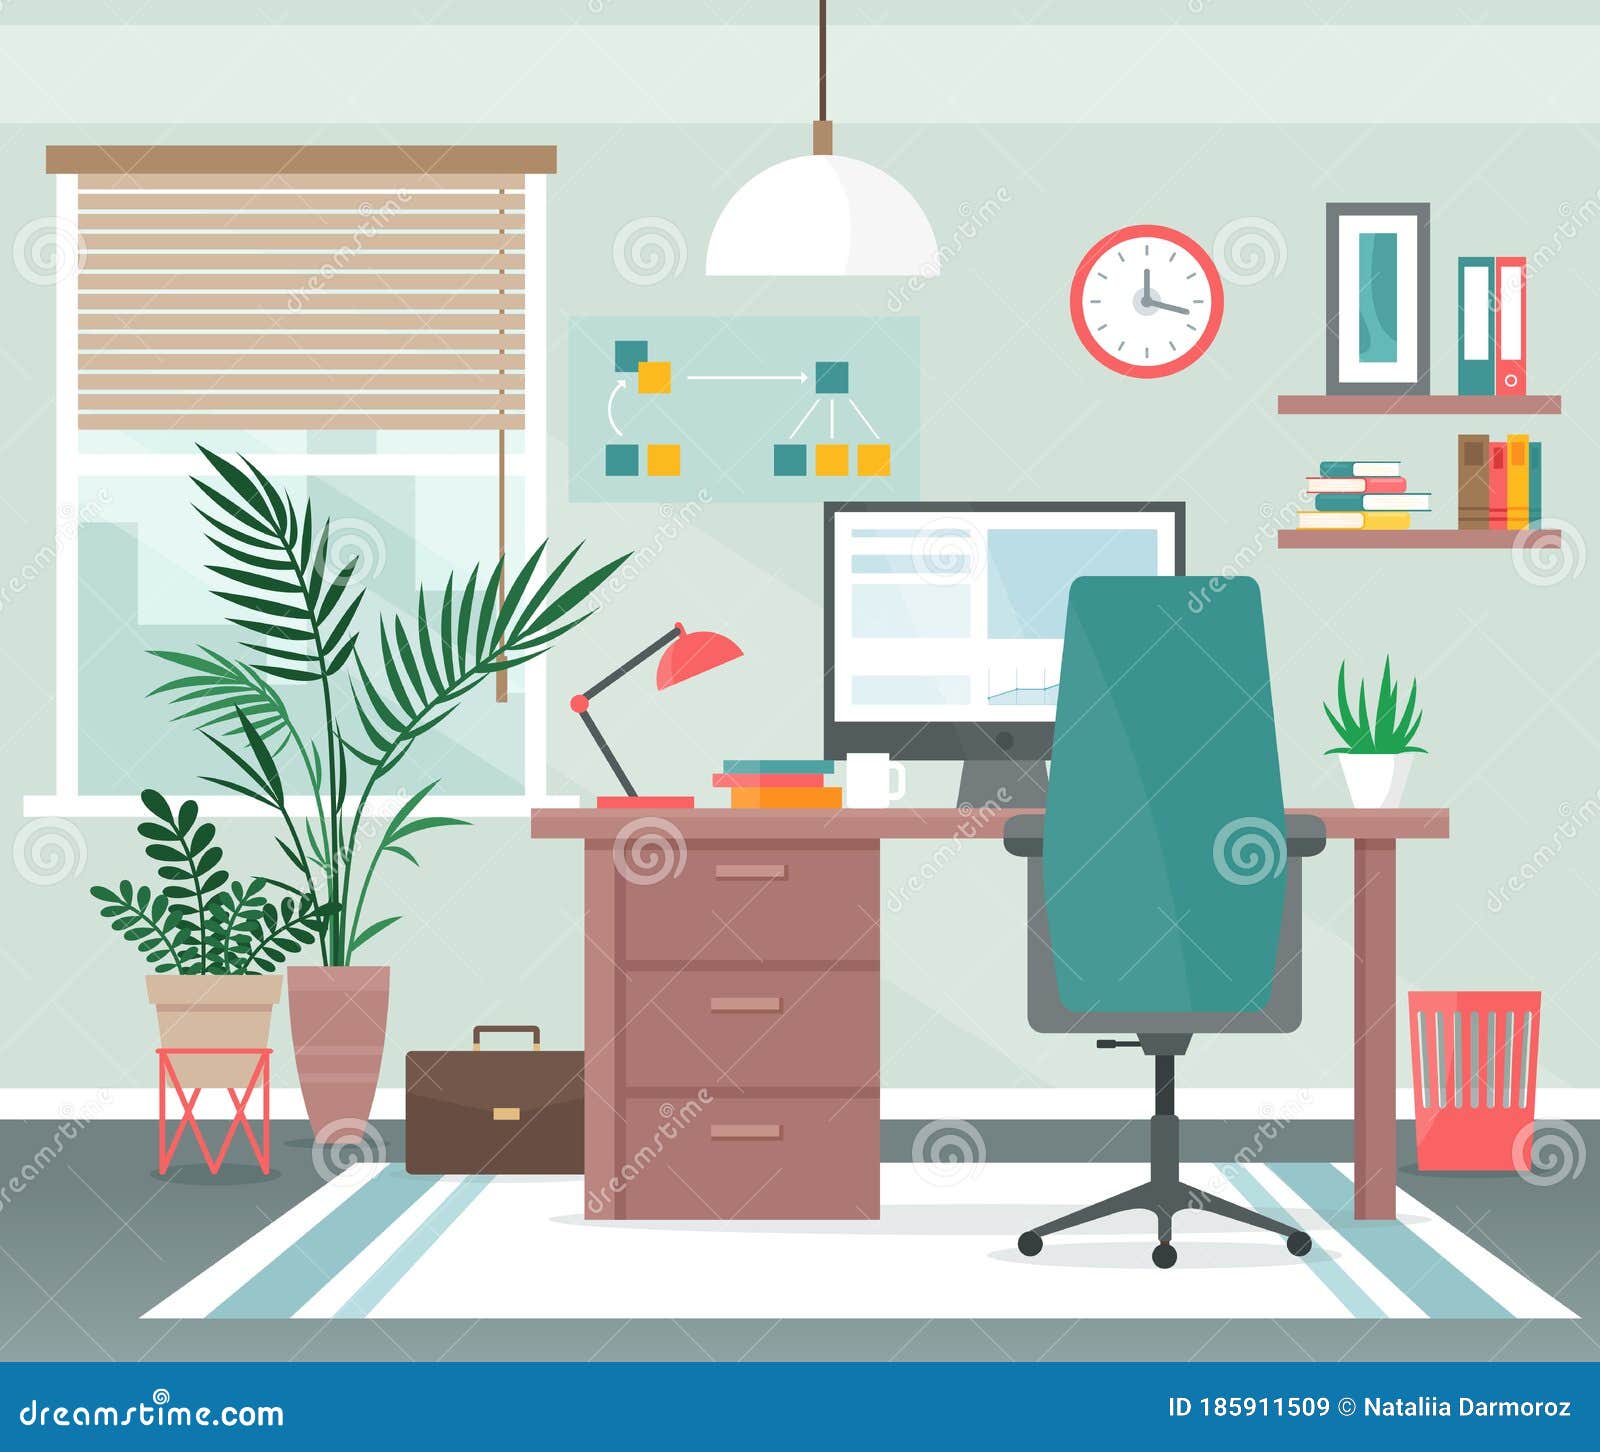 Home Office Workplace Vector Illustration, Cartoon Flat Apartment Room  Interior with Computer on Table for Freelance Stock Vector - Illustration  of computer, building: 185911509